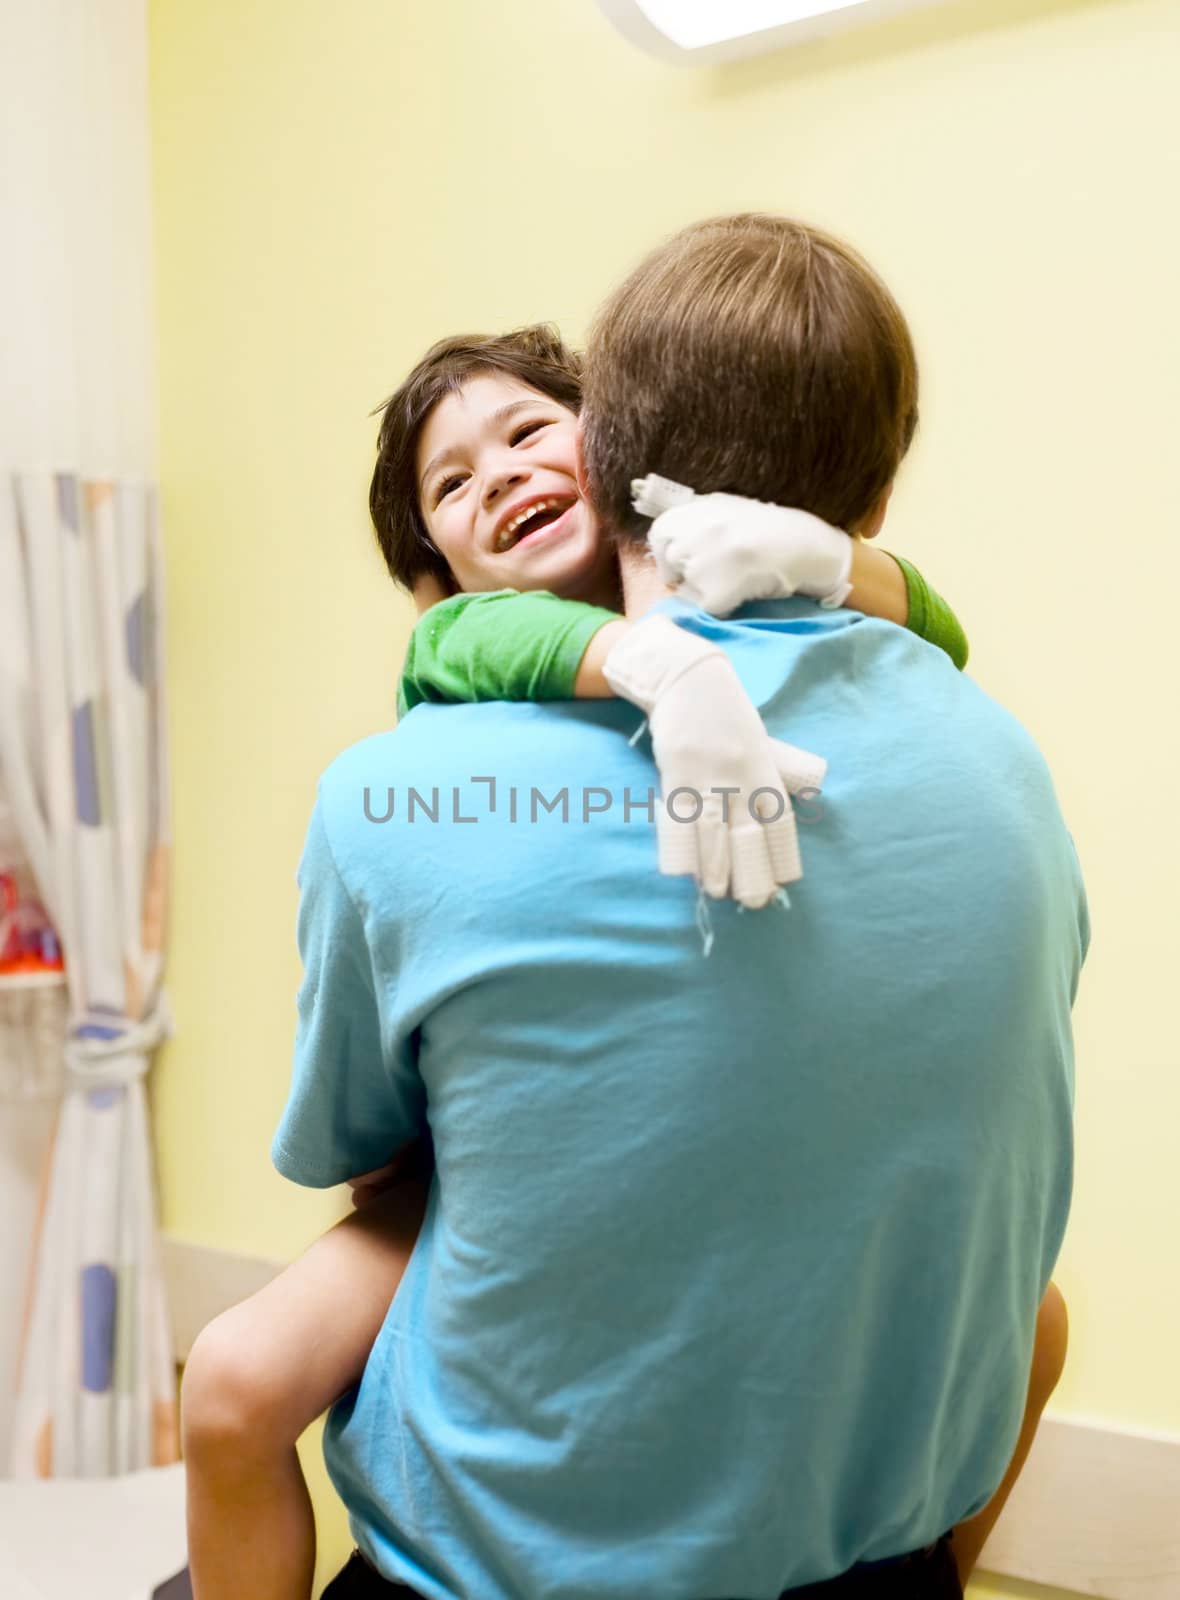 Little boy with cerebral palsy in doctor's office, laughing with his father